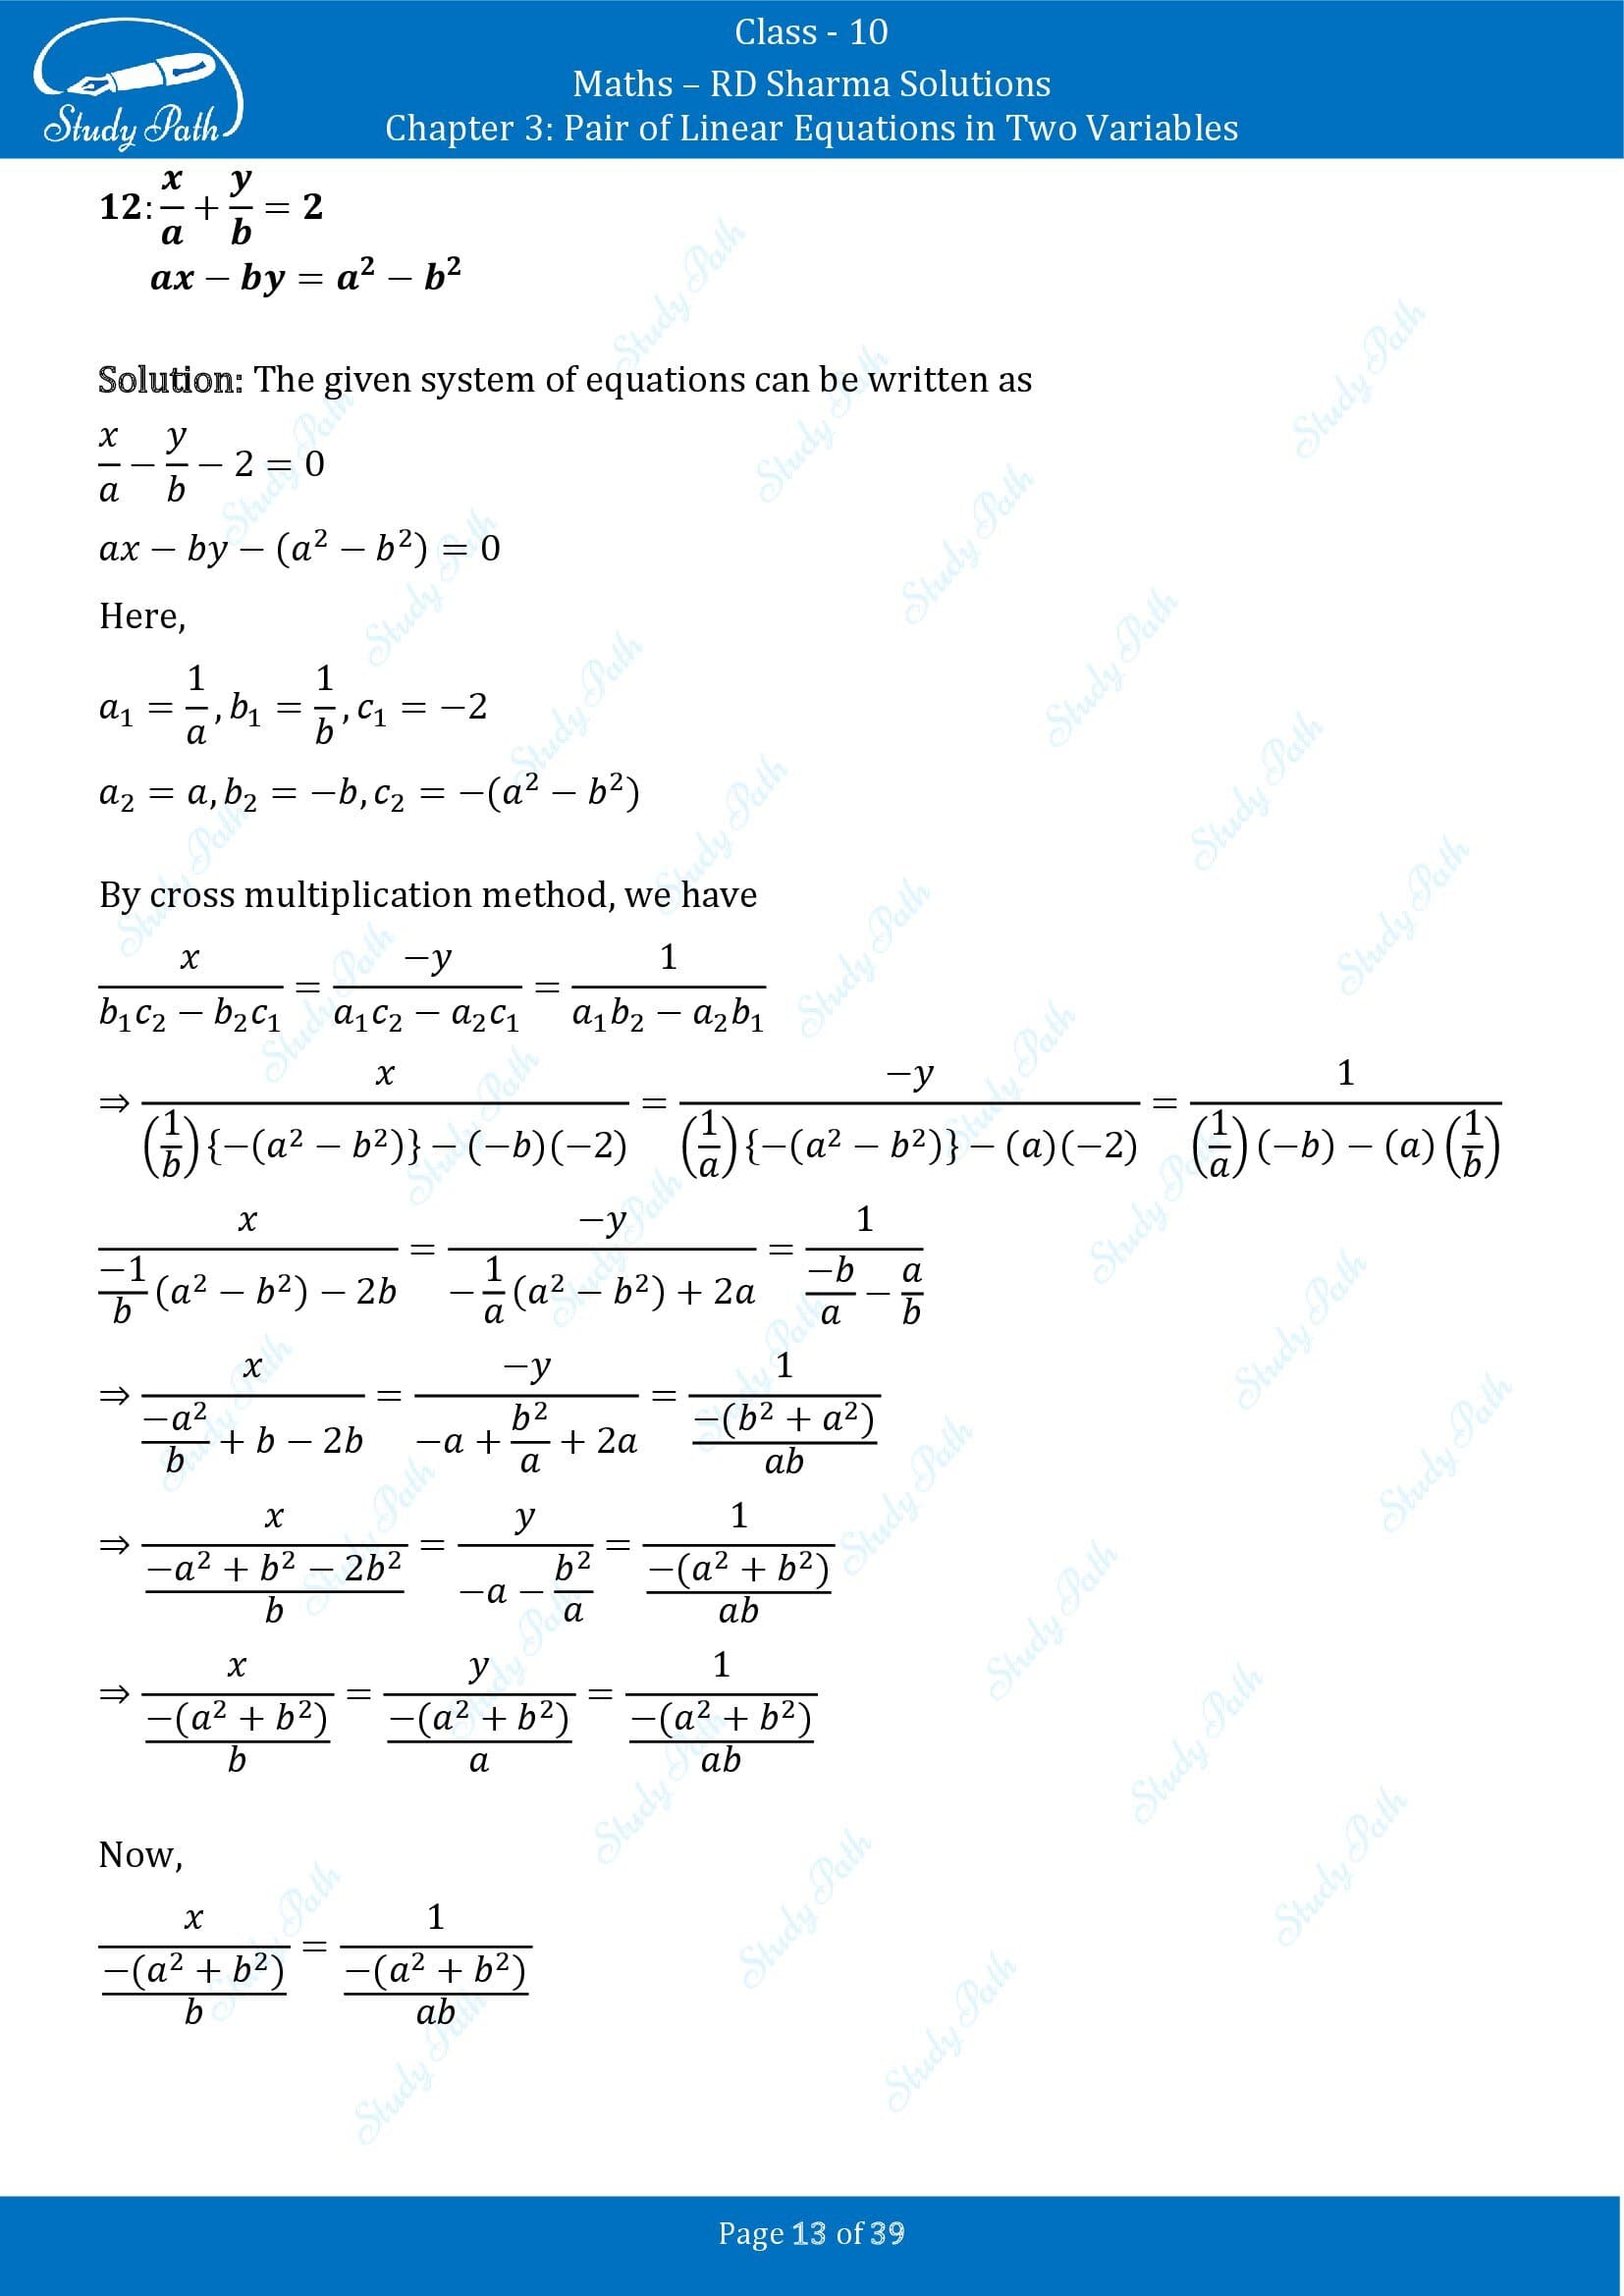 RD Sharma Solutions Class 10 Chapter 3 Pair of Linear Equations in Two Variables Exercise 3.4 00013